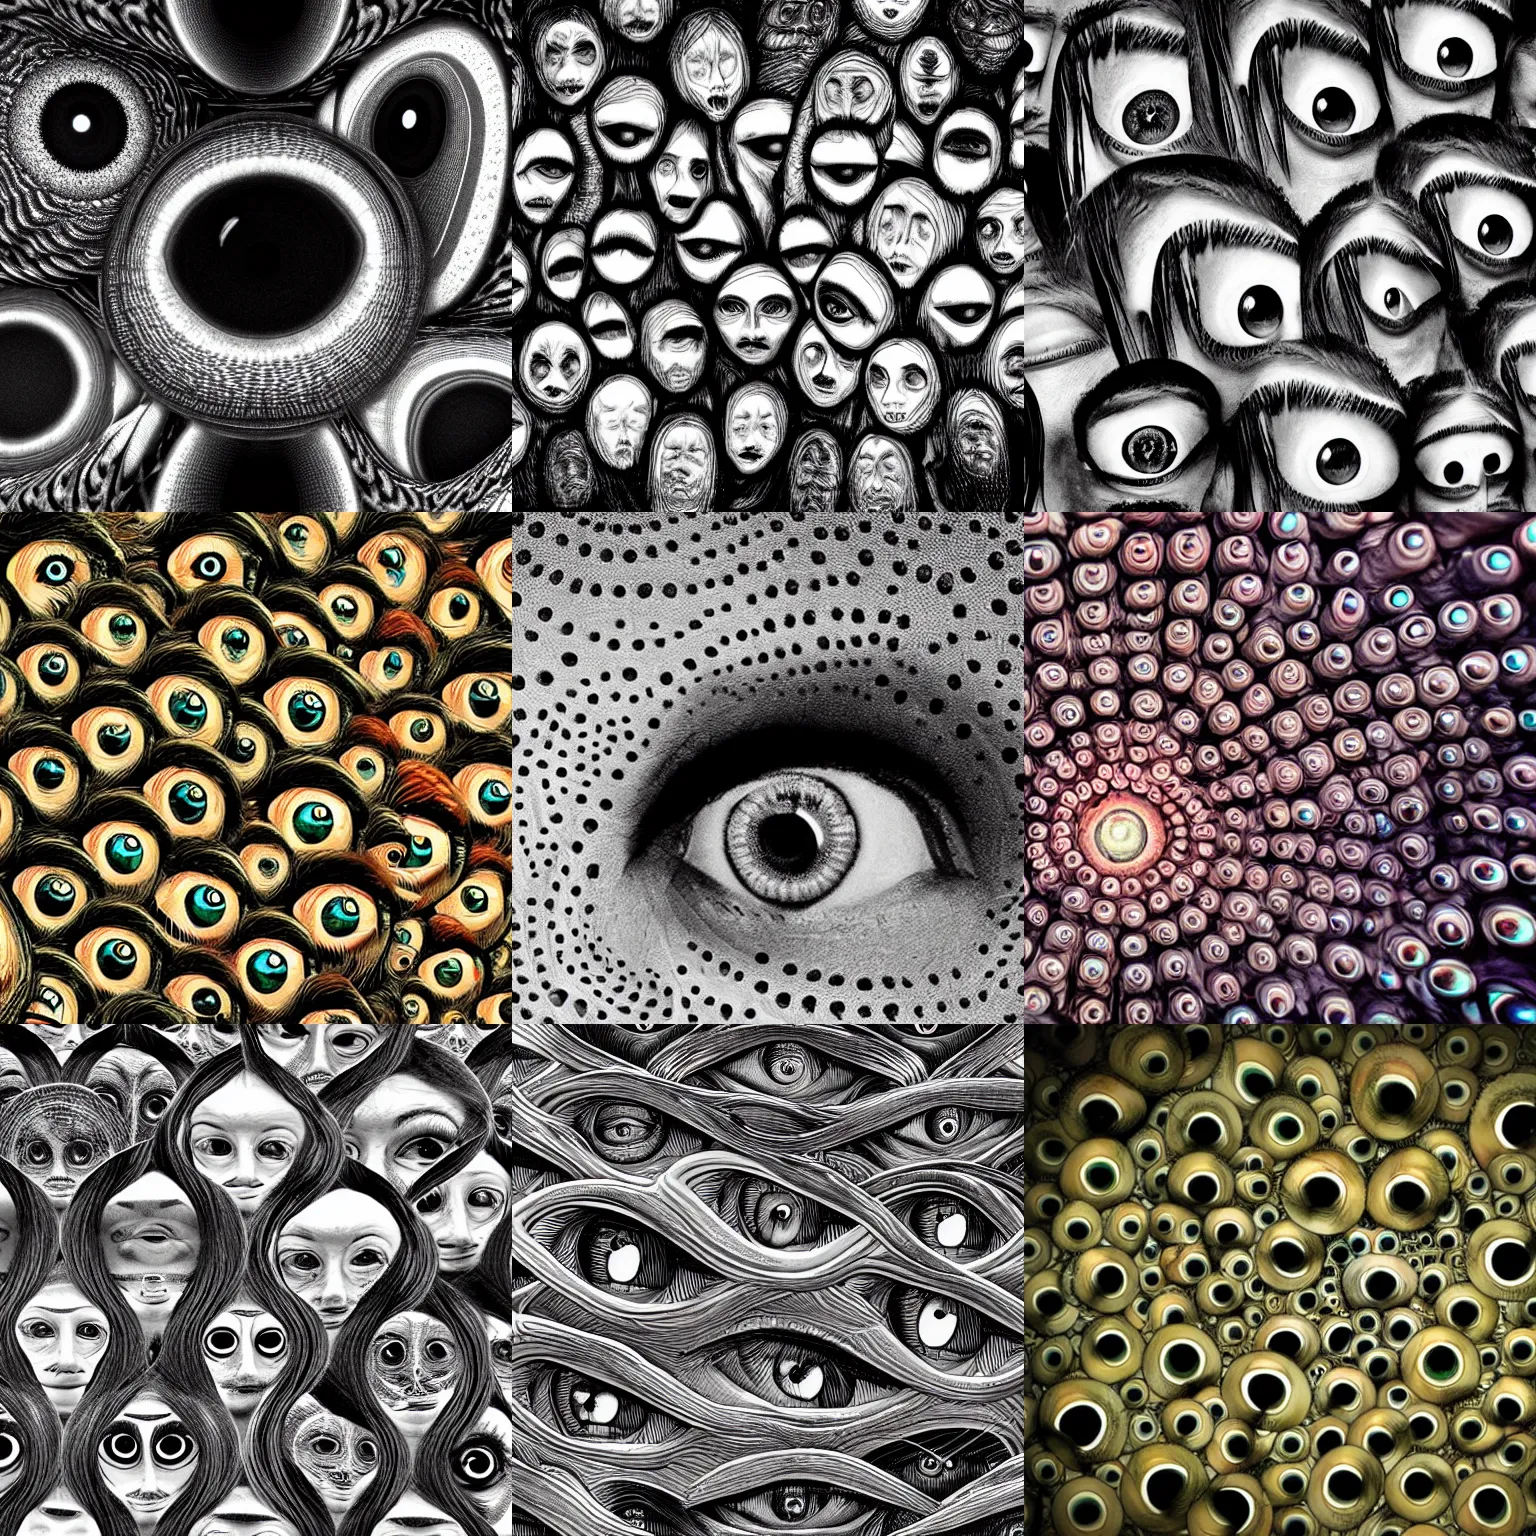 Prompt: detailed photograph of eyes so many eyes lots of eyes staring uncomfortable psycadalic surreal bending waves of eyes and painful dark horrid